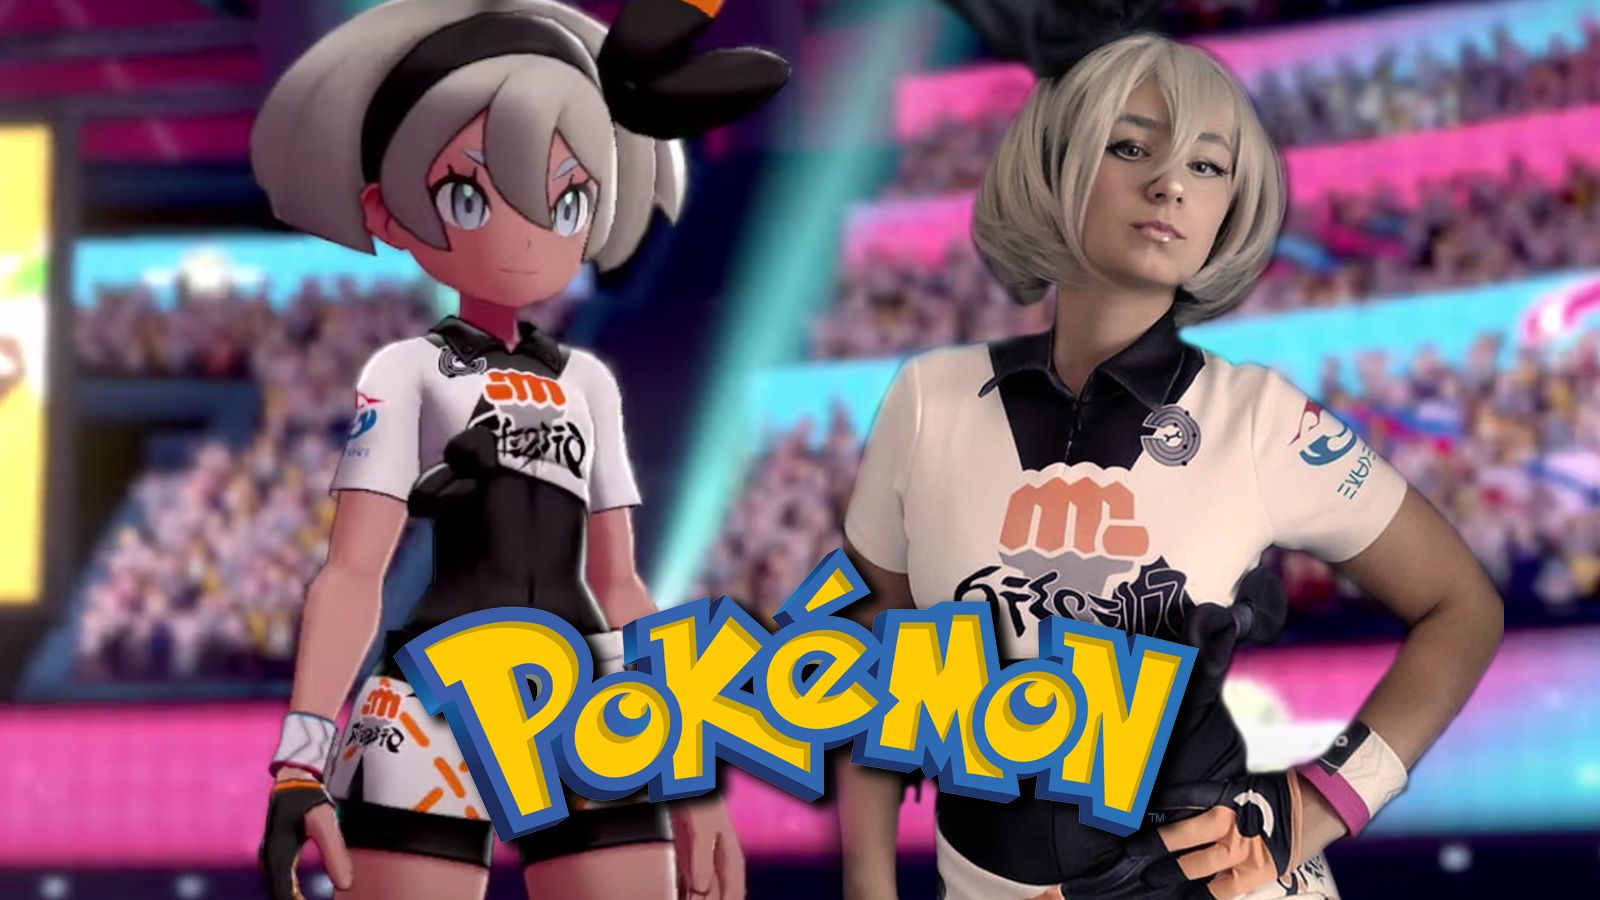 Pokemon Sword & Shield cosplayer trains Fighting types as Gym Leader Bea